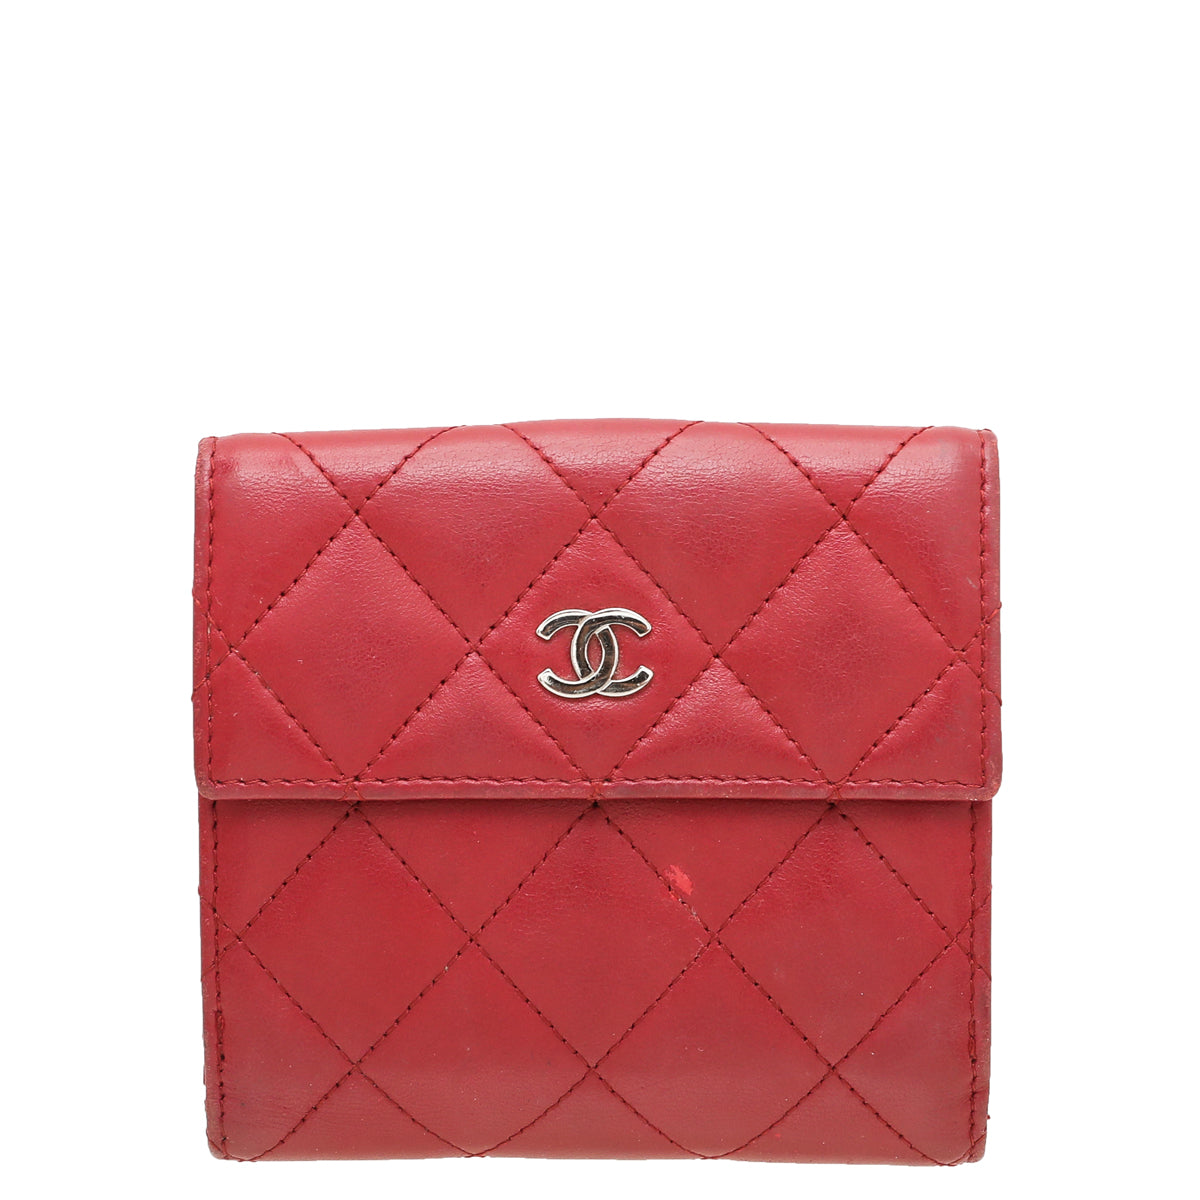 Chanel Red CC French Flap Wallet